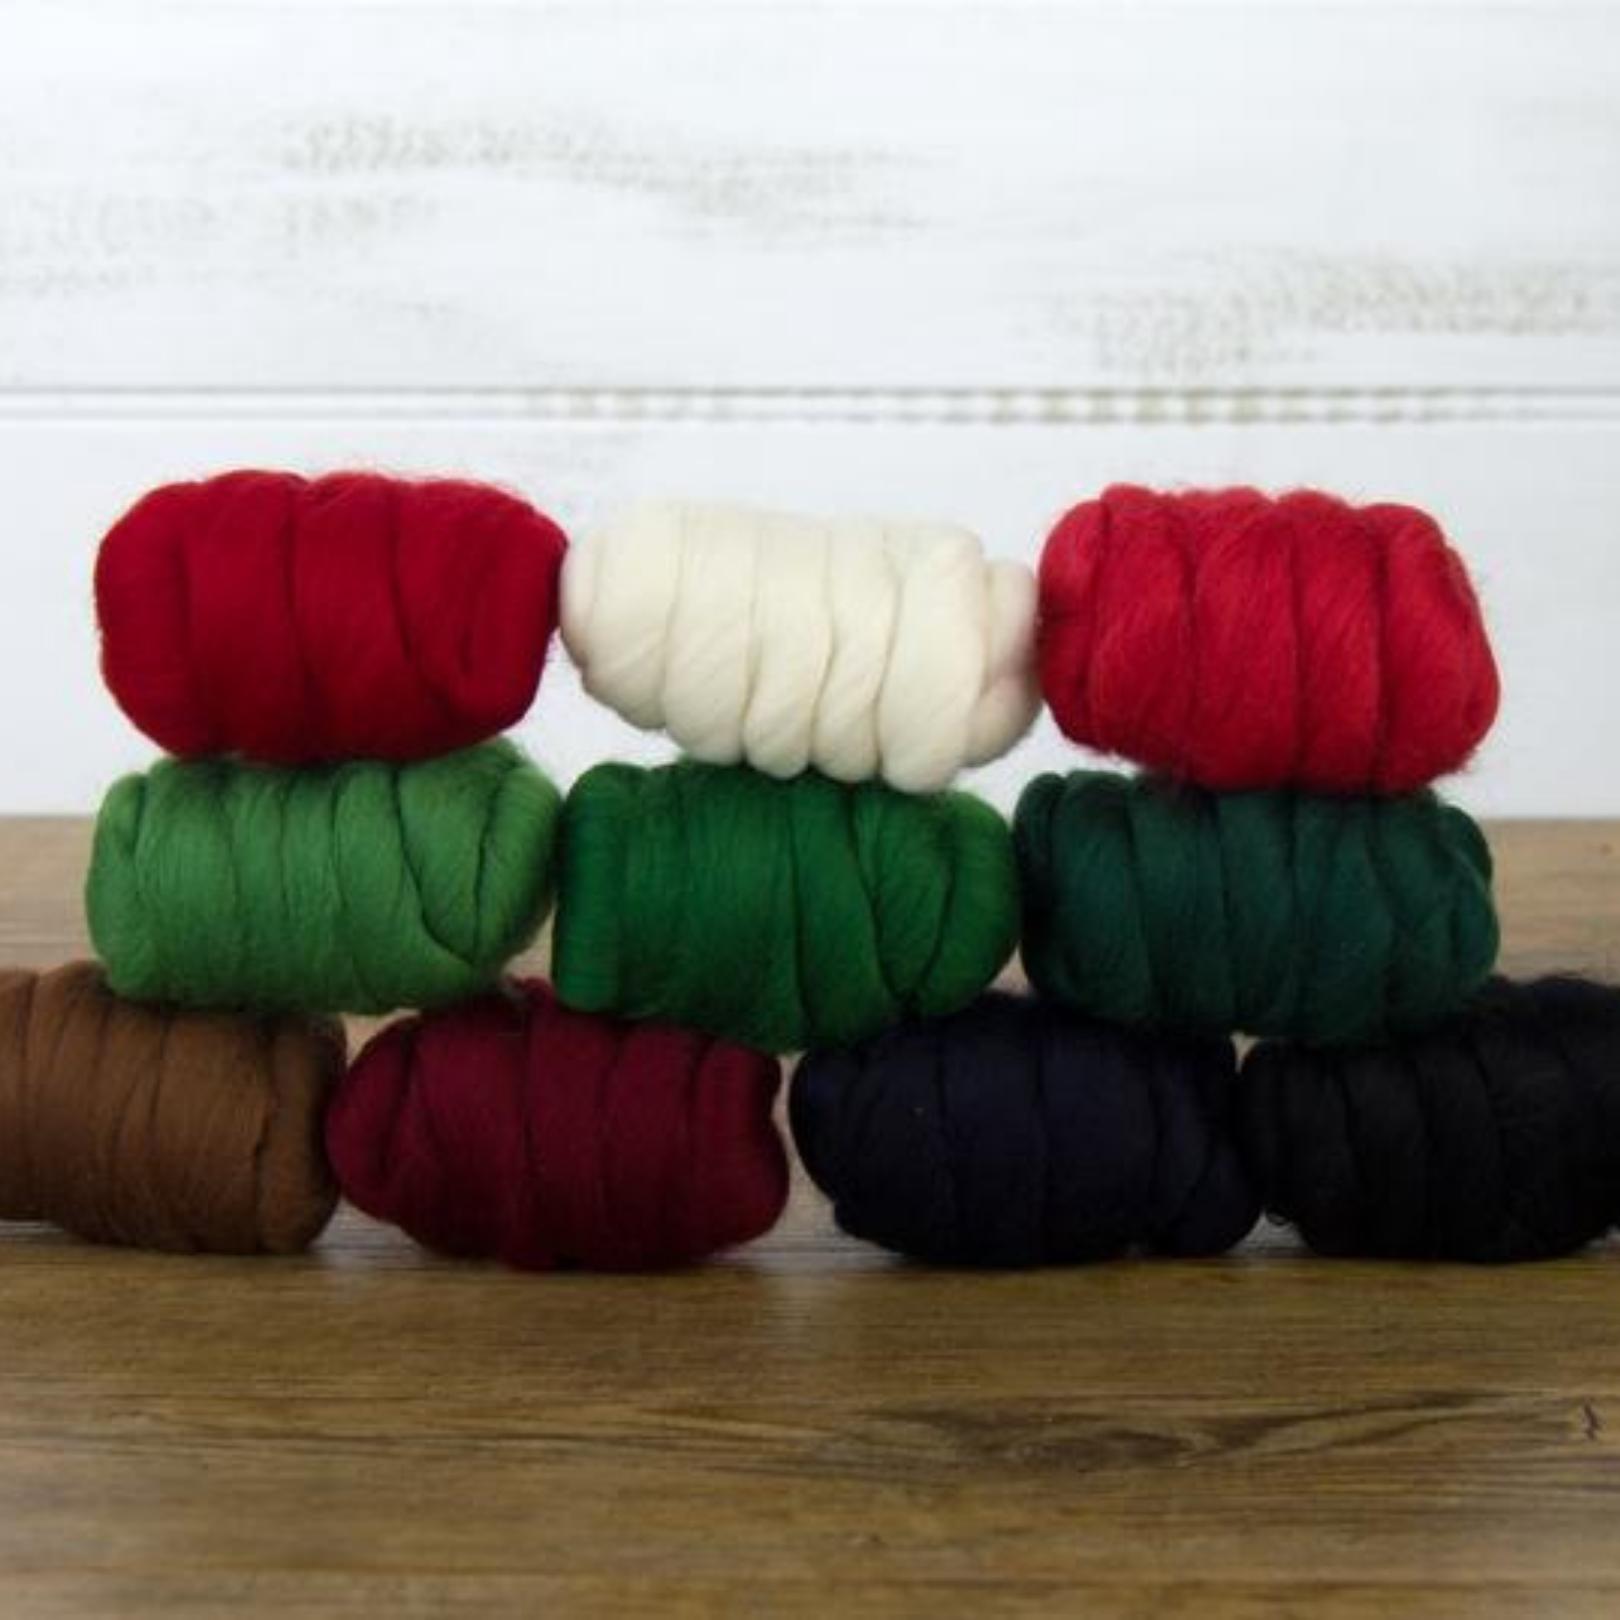 Mixed Merino Wool Variety Pack | Holiday Cheer (Multicolored) 250 Grams, 23 Micron - Textile Indie 